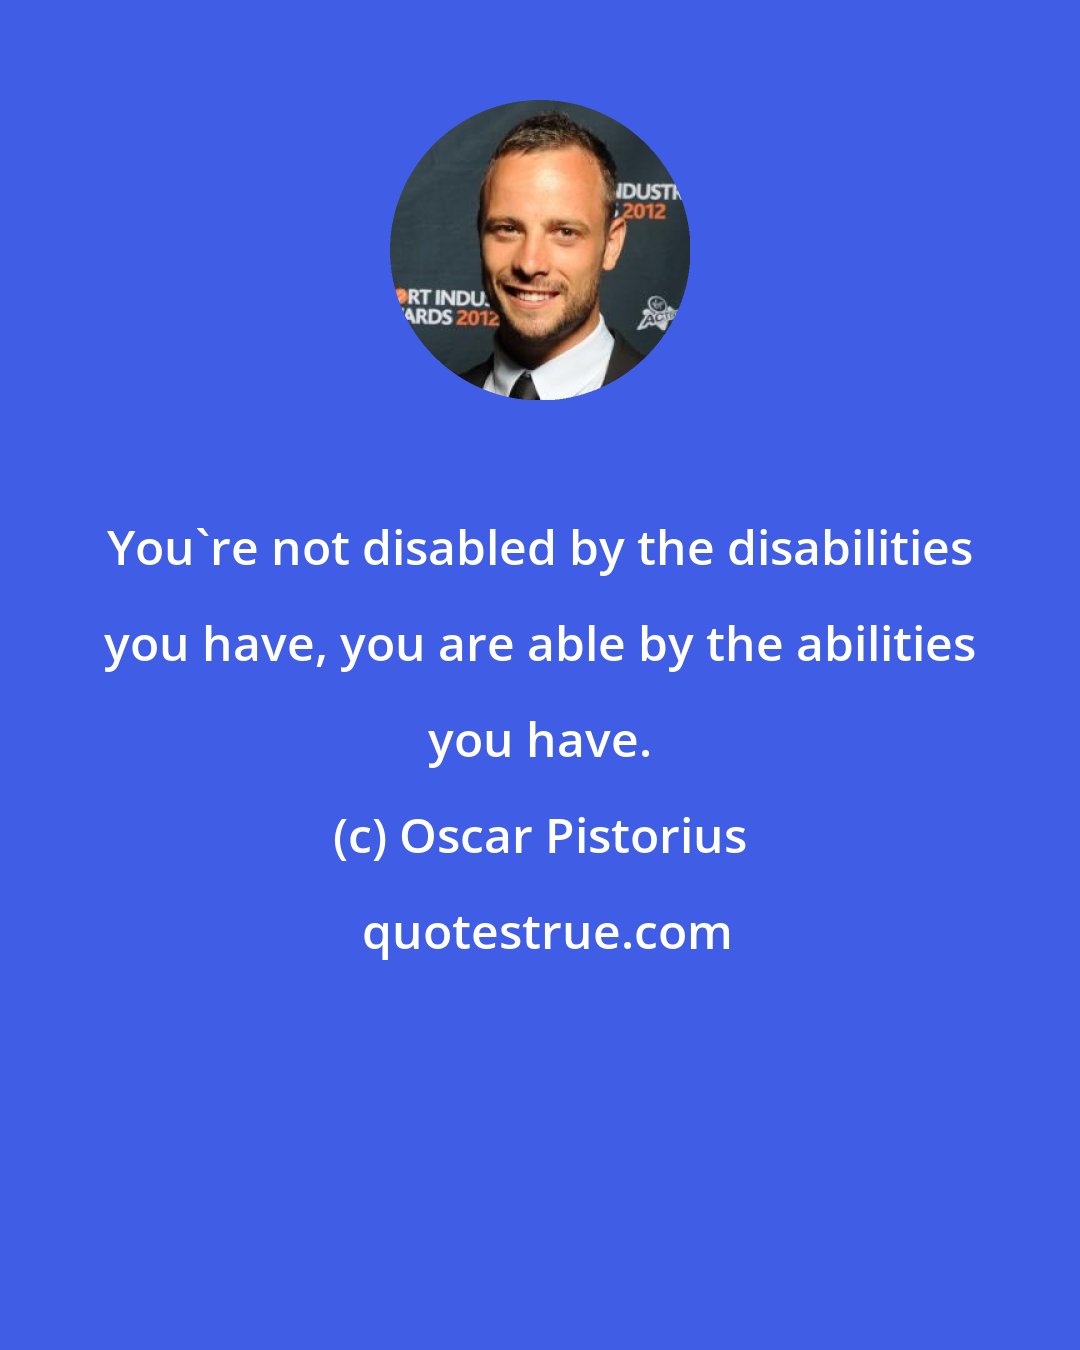 Oscar Pistorius: You're not disabled by the disabilities you have, you are able by the abilities you have.